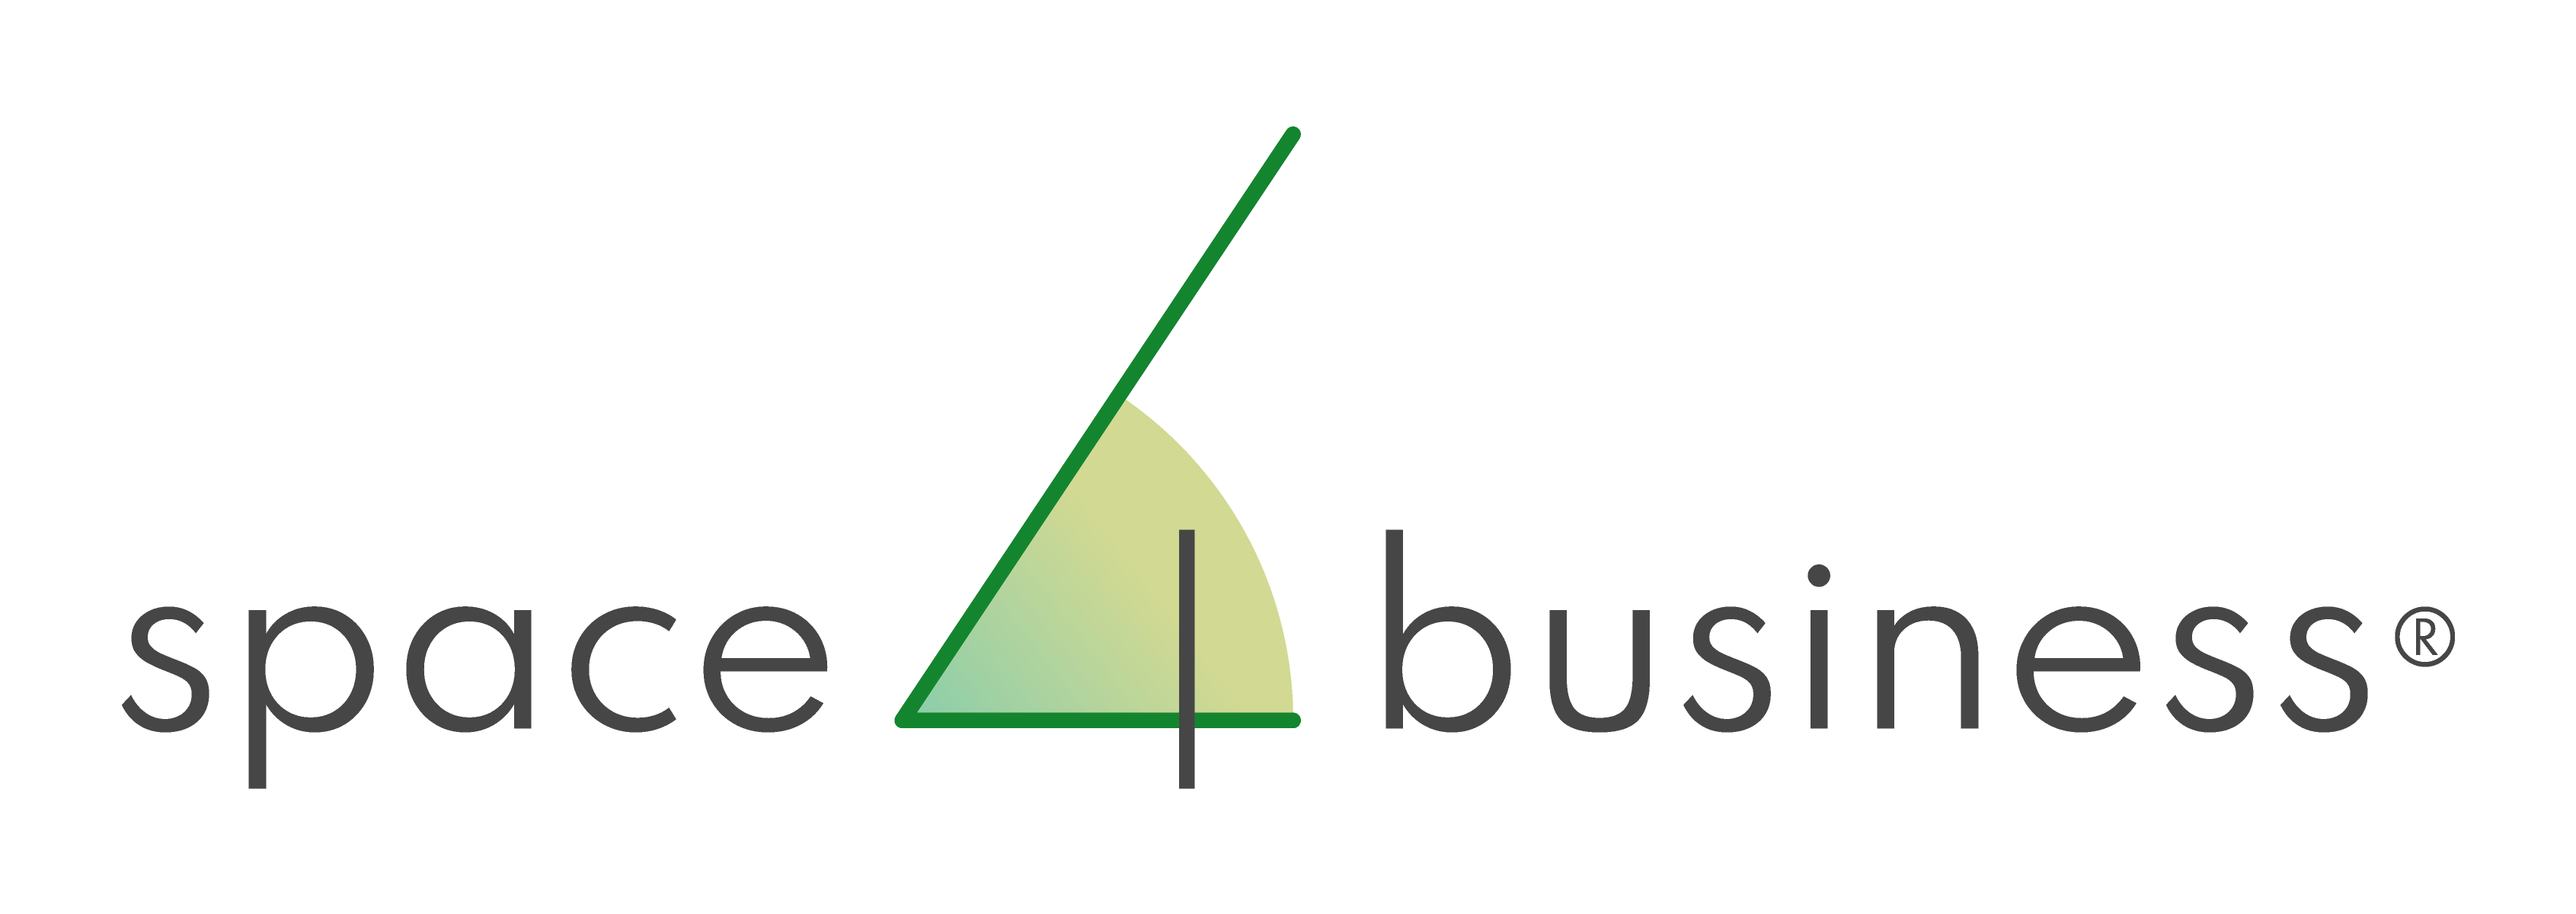 Space4Business Logo